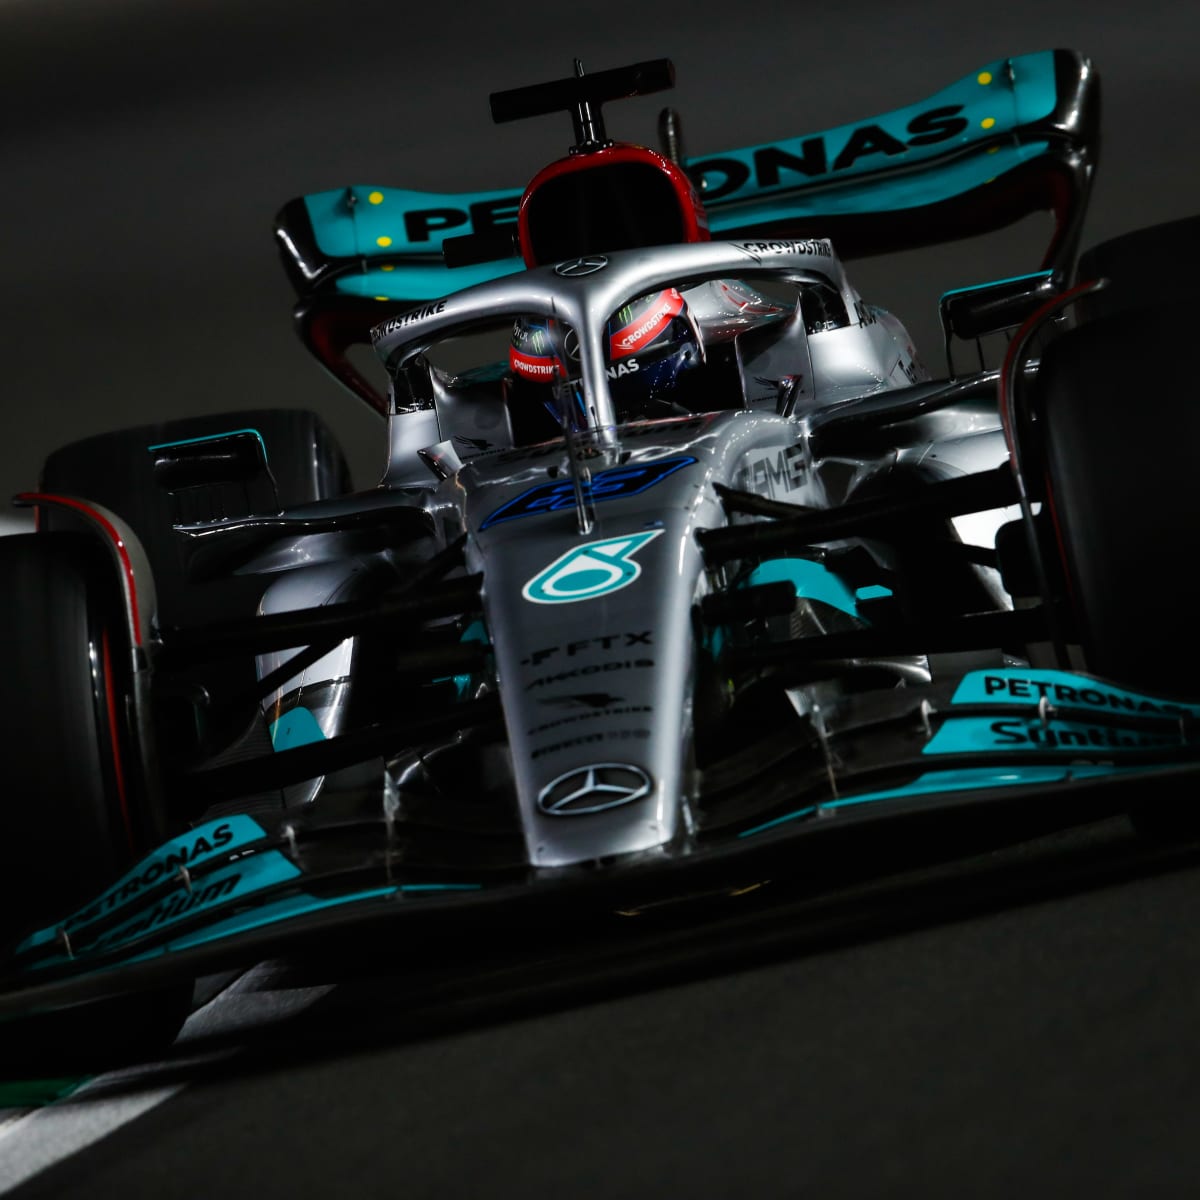 F1 News: Mercedes set to lose major sponsor as crypto partner goes bankrupt  - F1 Briefings | Latest News, Rumours, Videos, and 